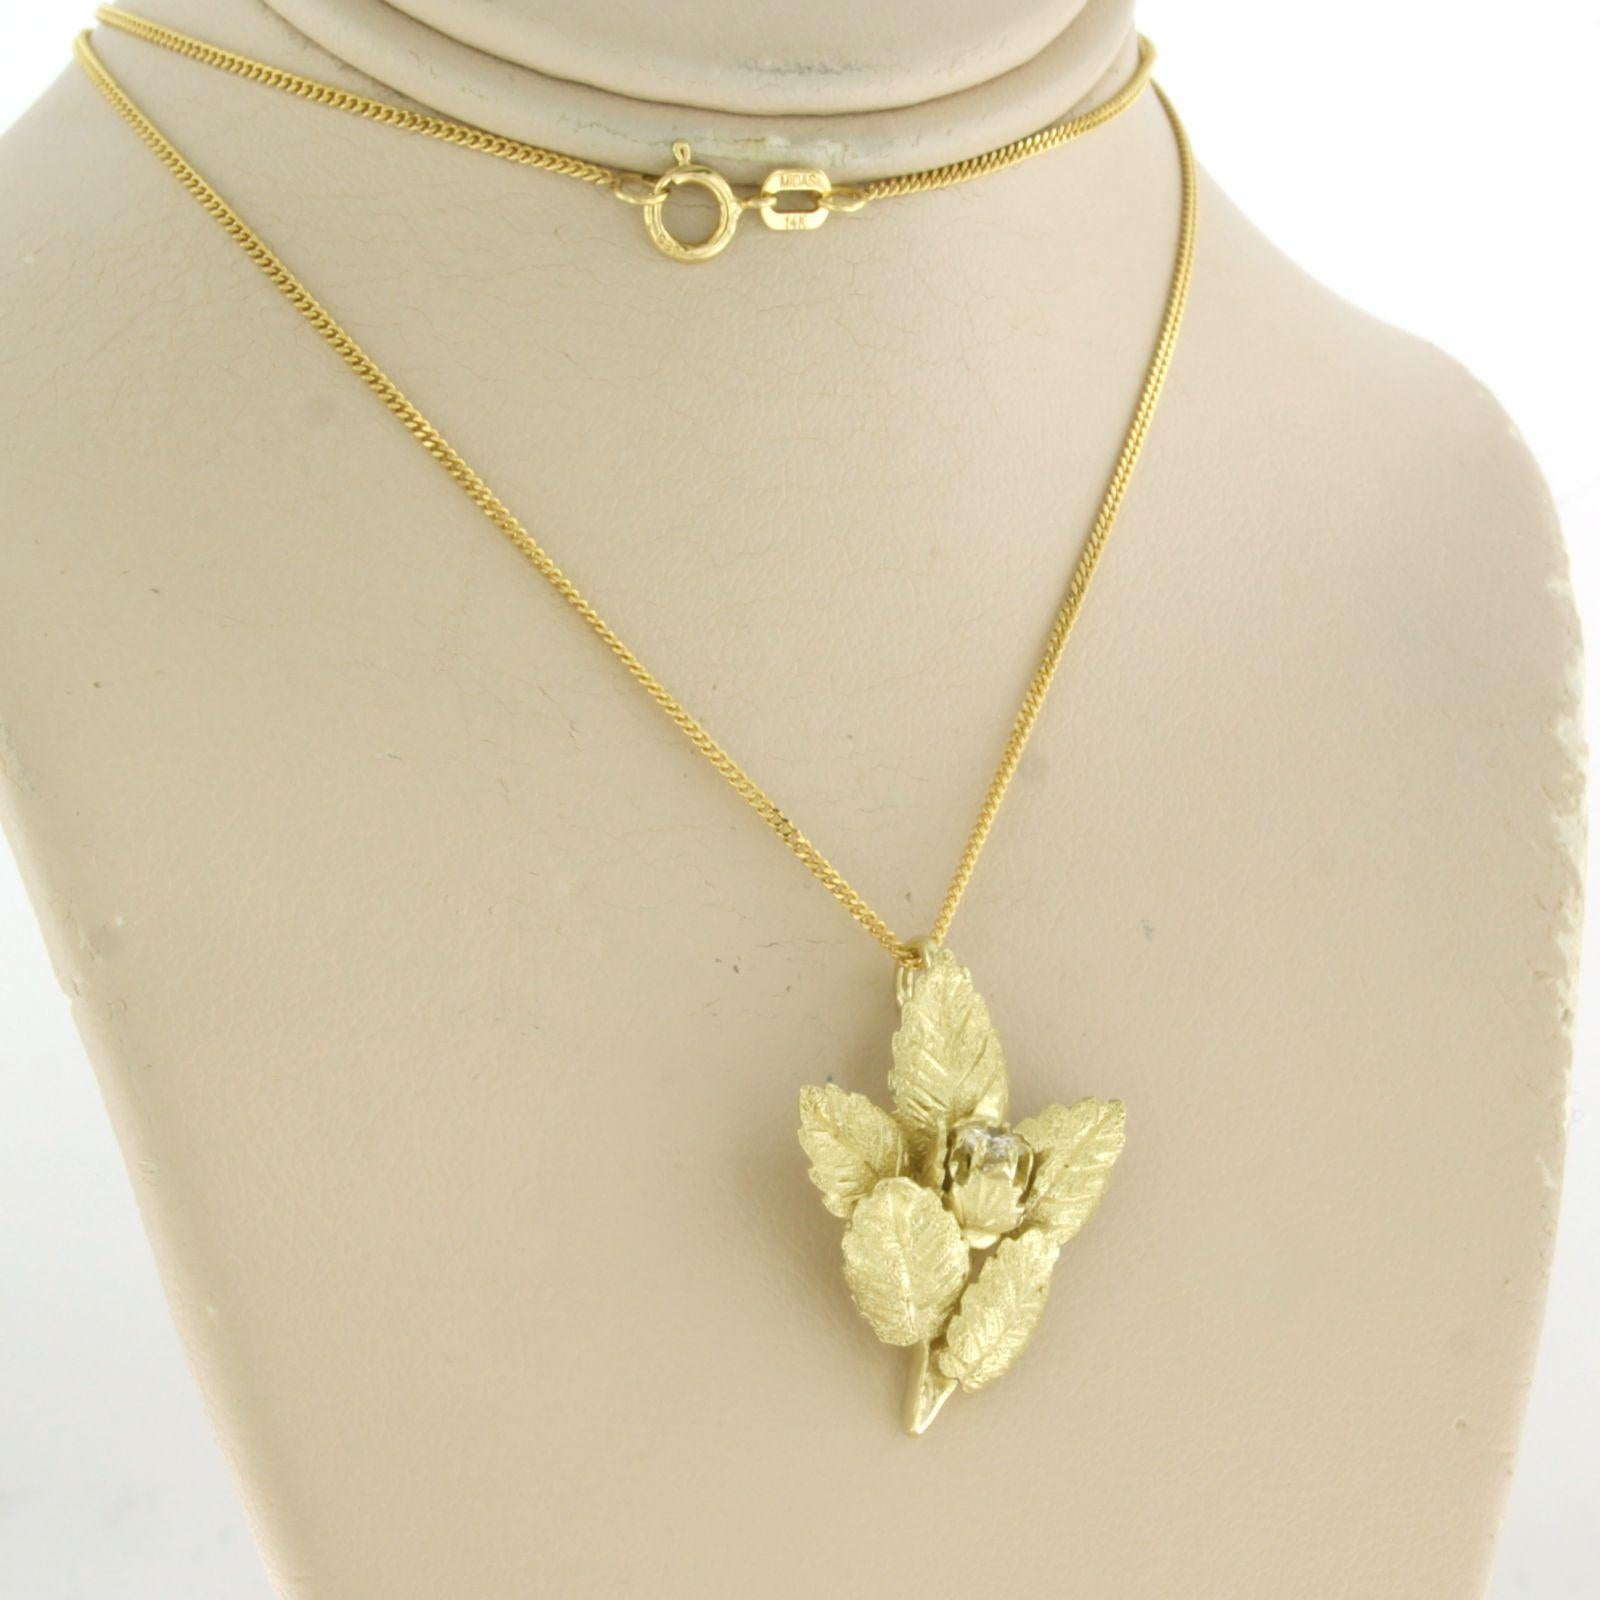 14k yellow gold necklace with flower pendant set with a brilliant cut diamond 0.20ct - F/G - VS/SI - 45cm long

Detailed description

the length of the necklace is 45 cm long by 0.7 mm wide

the pendant is 2.5 cm high and 2.0 cm wide

total weight: